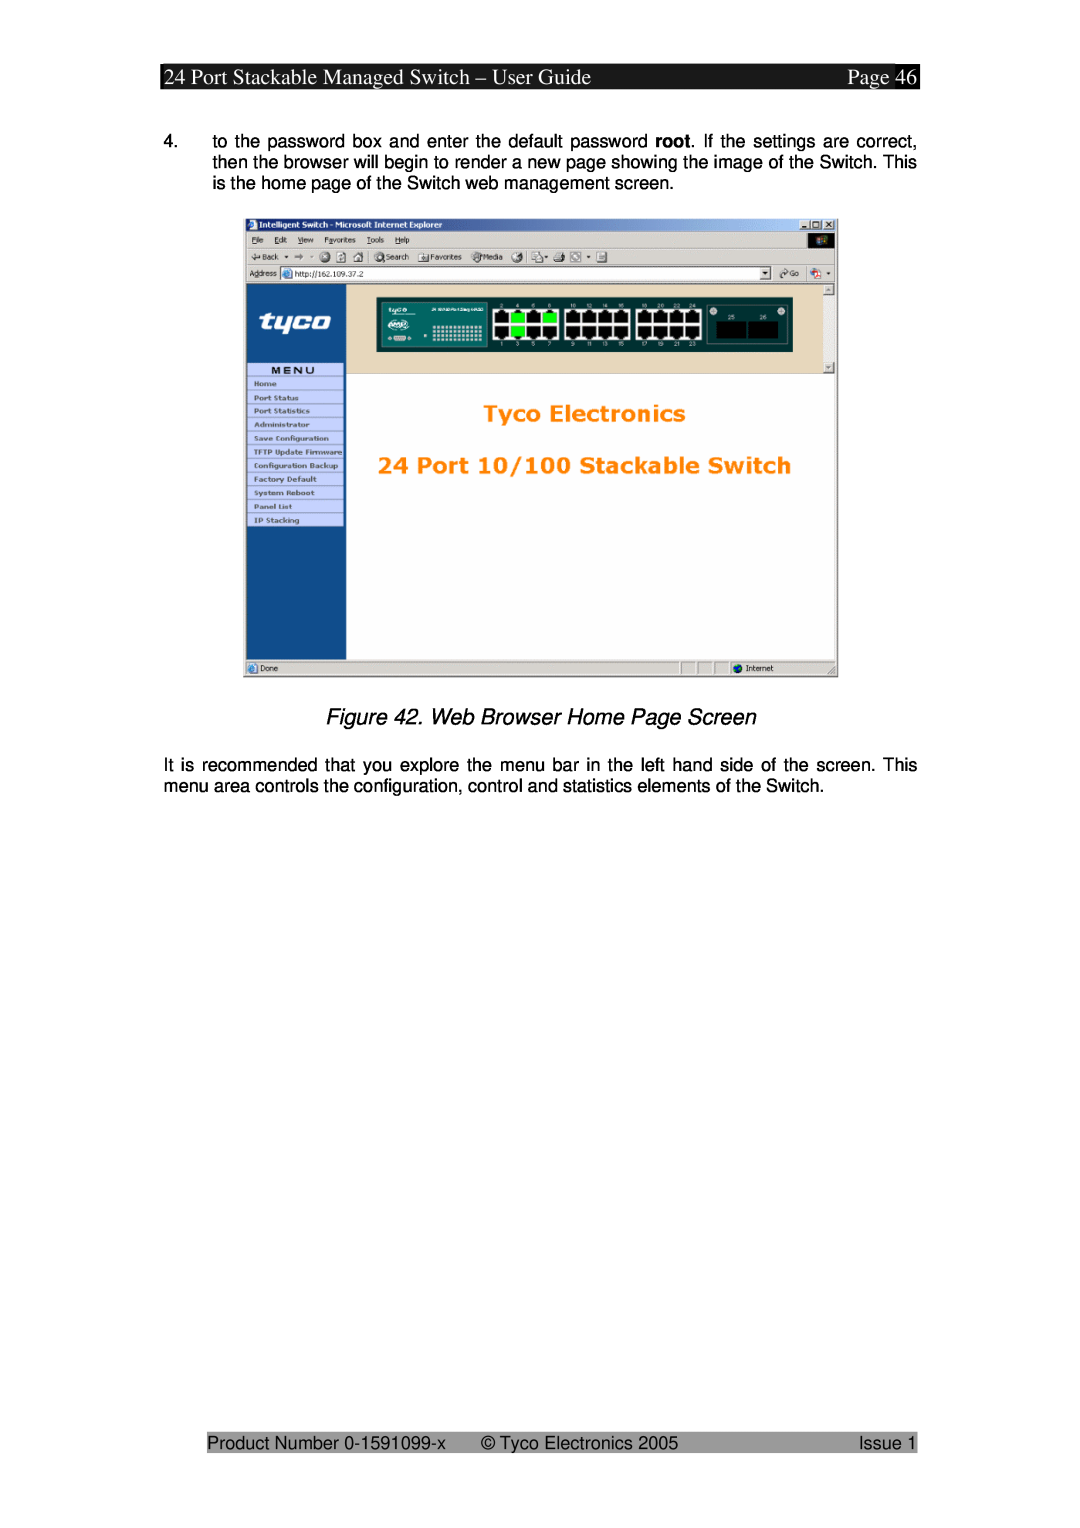 Tyco 0-1591099-x manual Port Stackable Managed Switch - User Guide, Web Browser Home Page Screen 